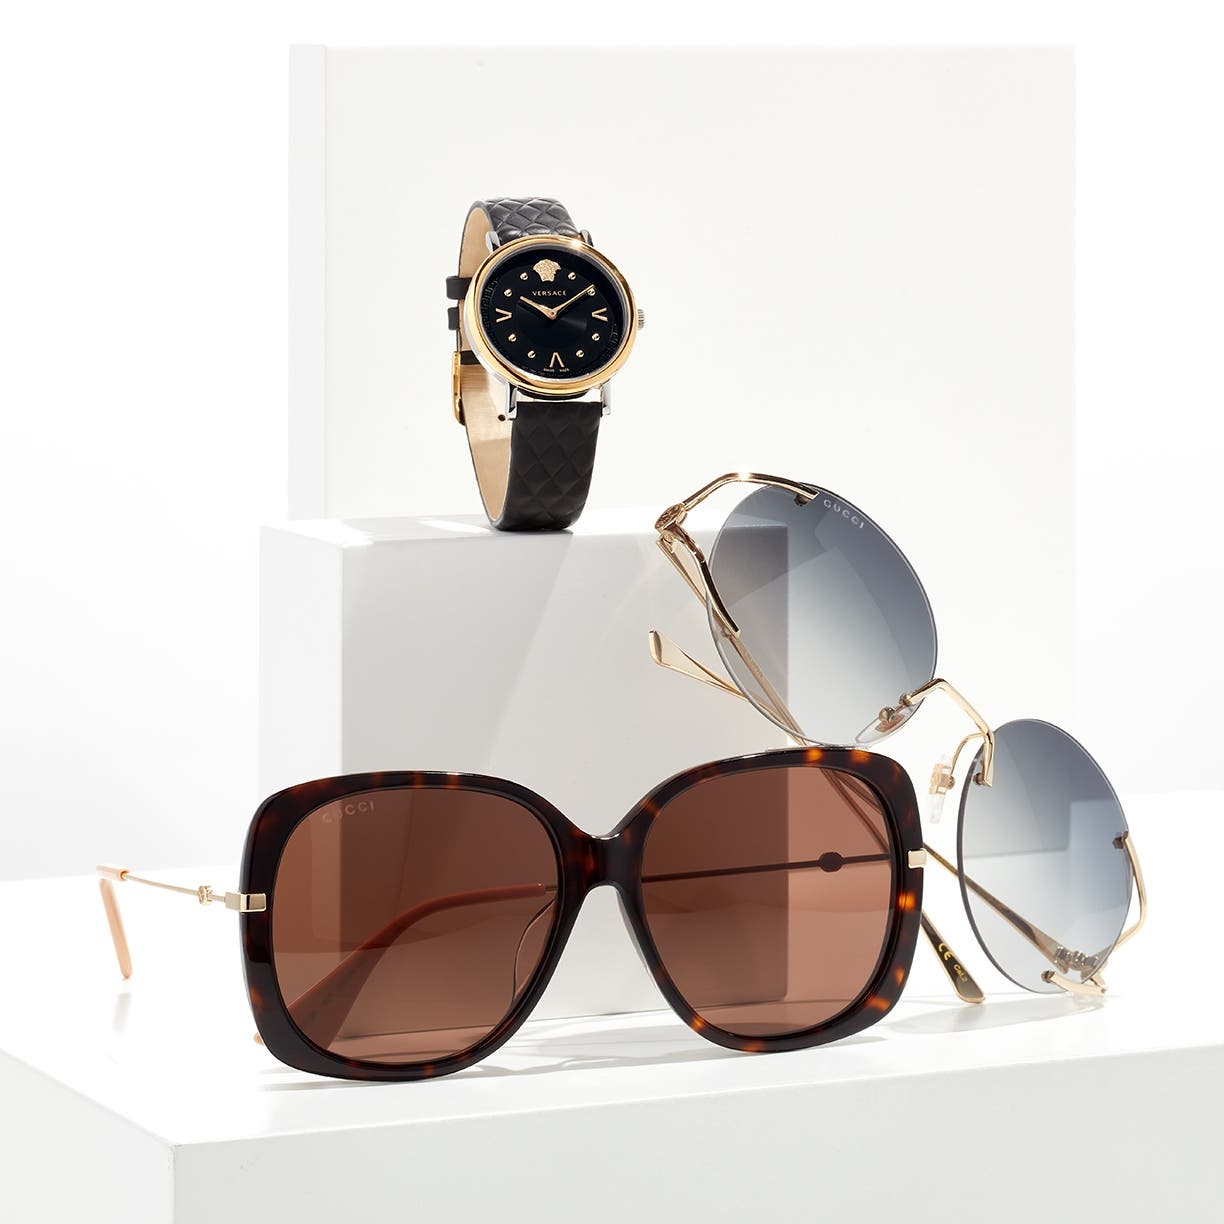 Nordstrom Rack Flash Sale: Up to 70% off Designer Sunglasses & Watches